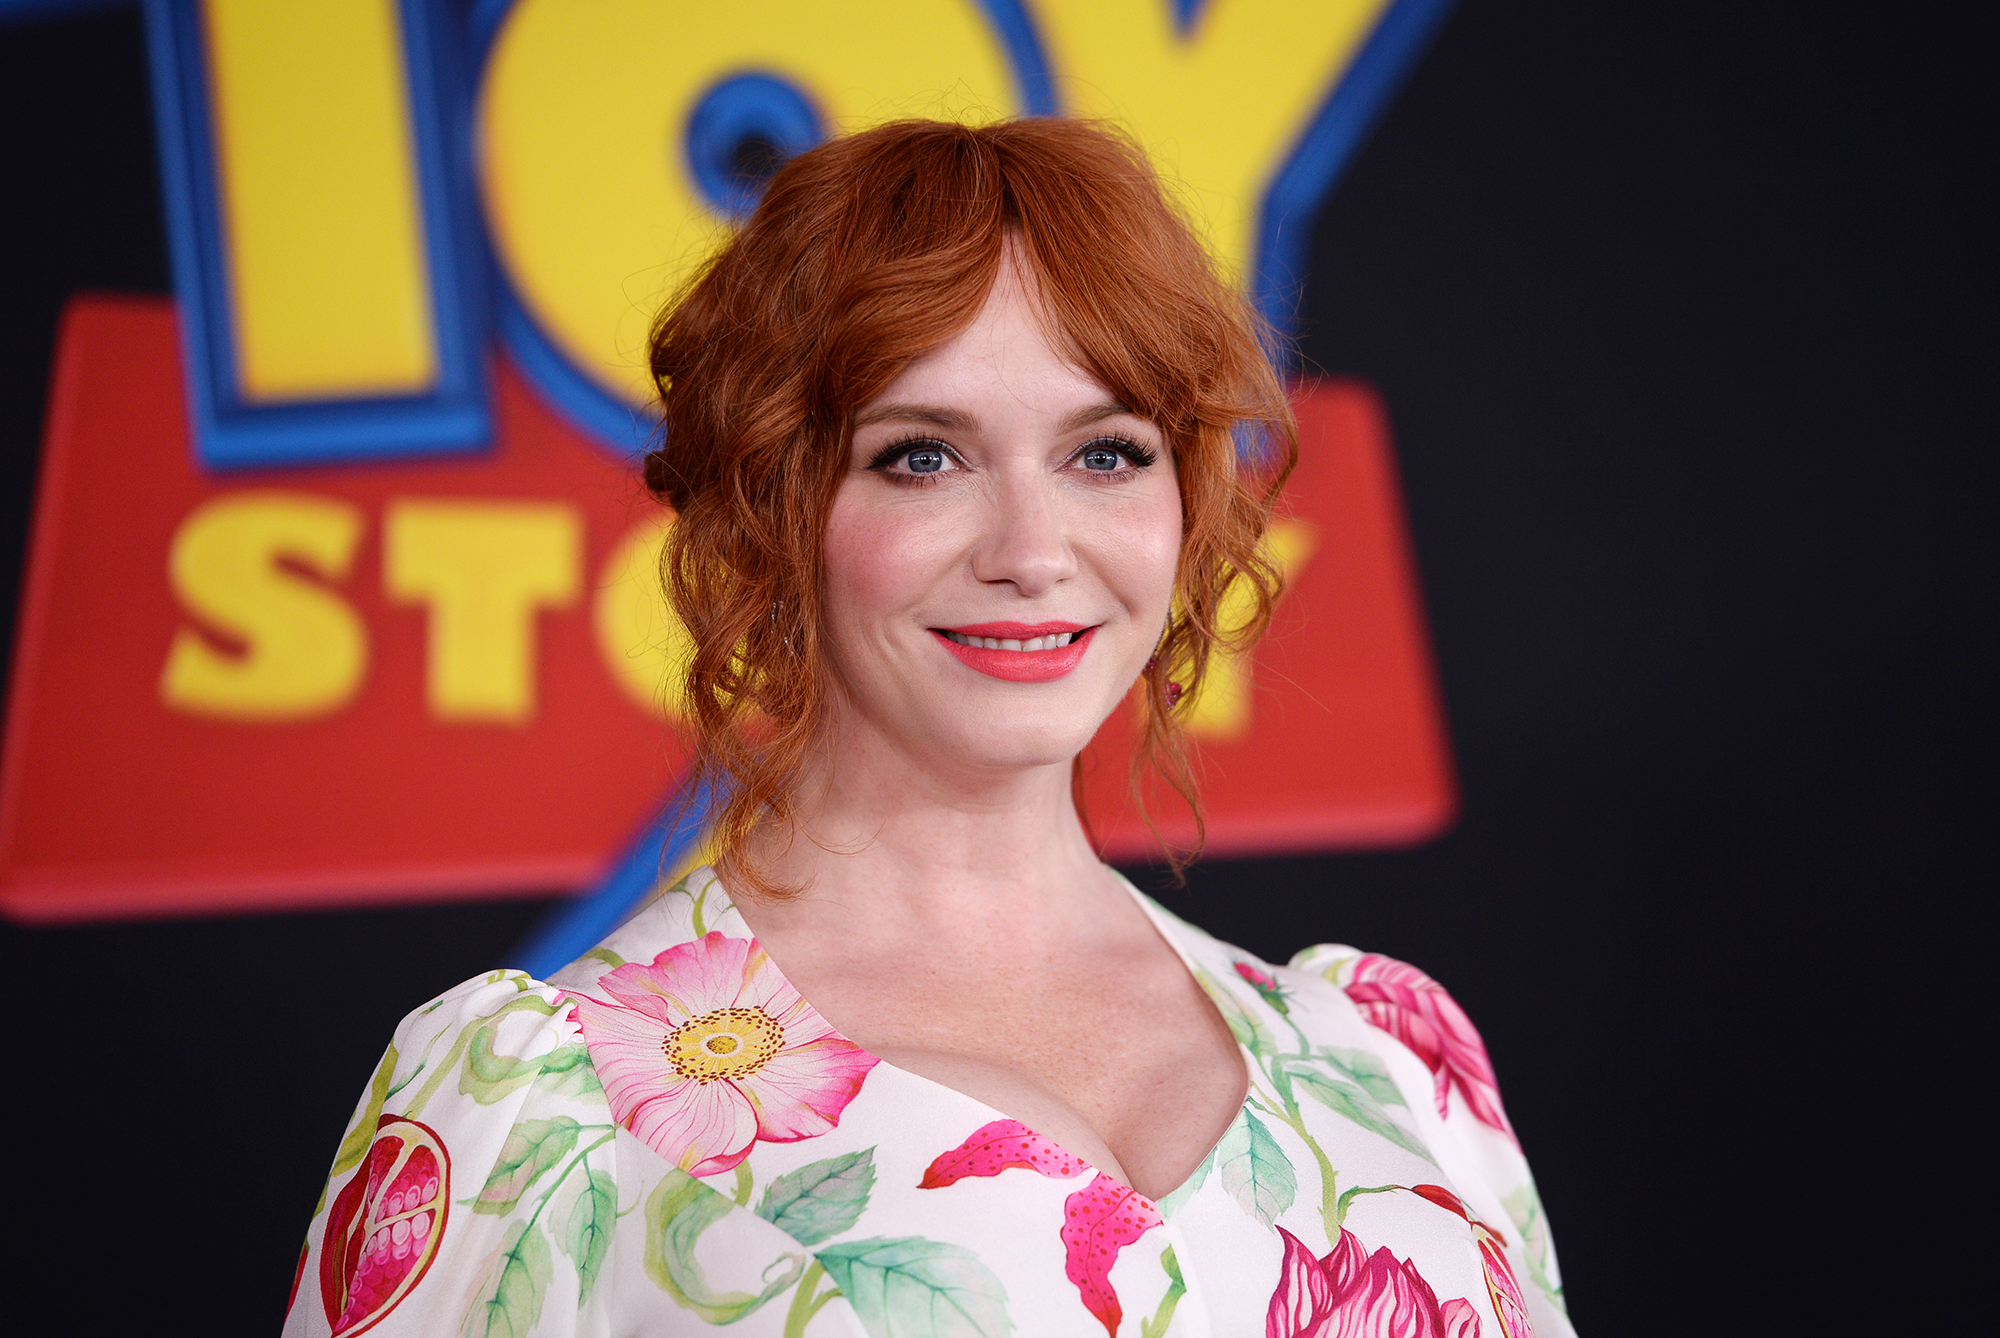 Premiere Of Disney And Pixar's "Toy Story 4" - Arrivals